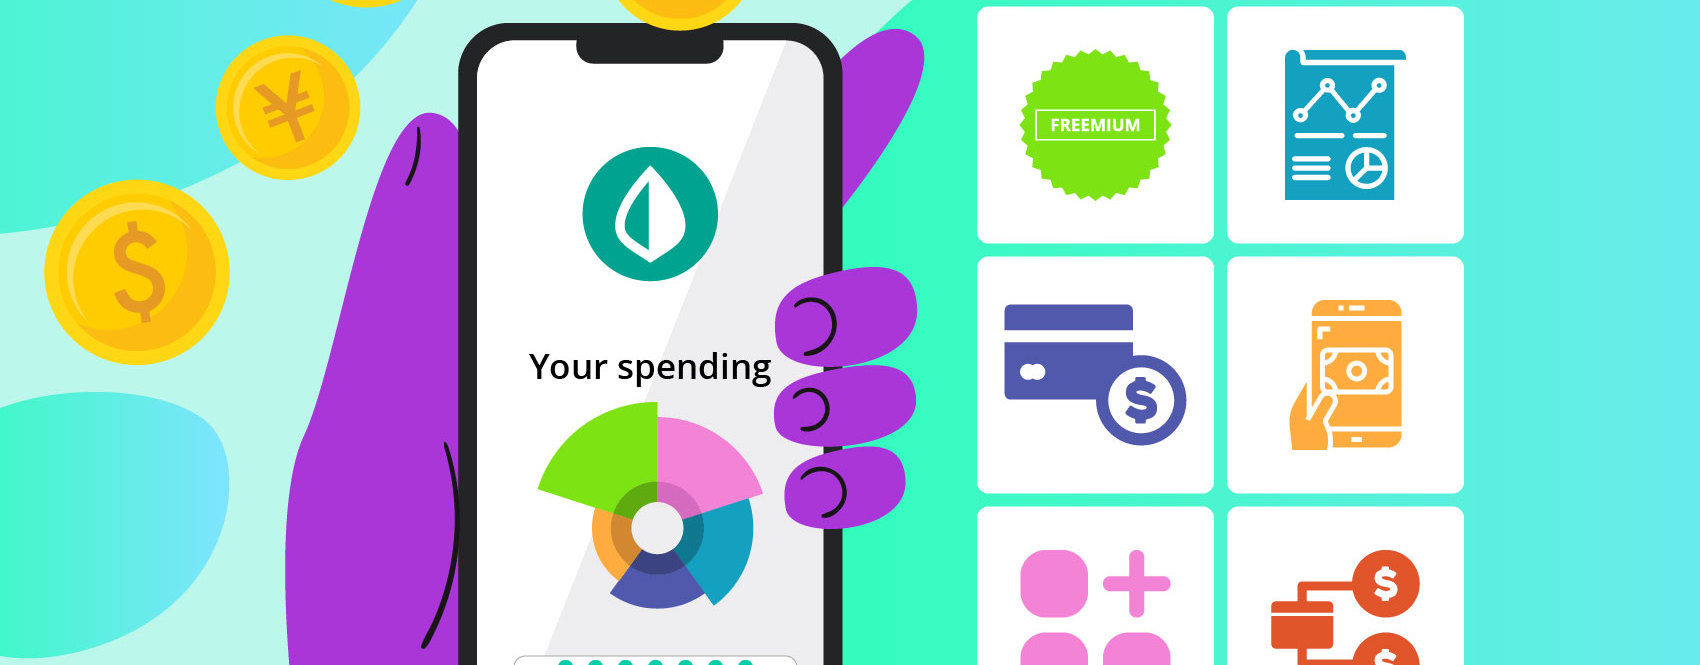 How to Build a Personal Finance App like Mint: Useful Tips